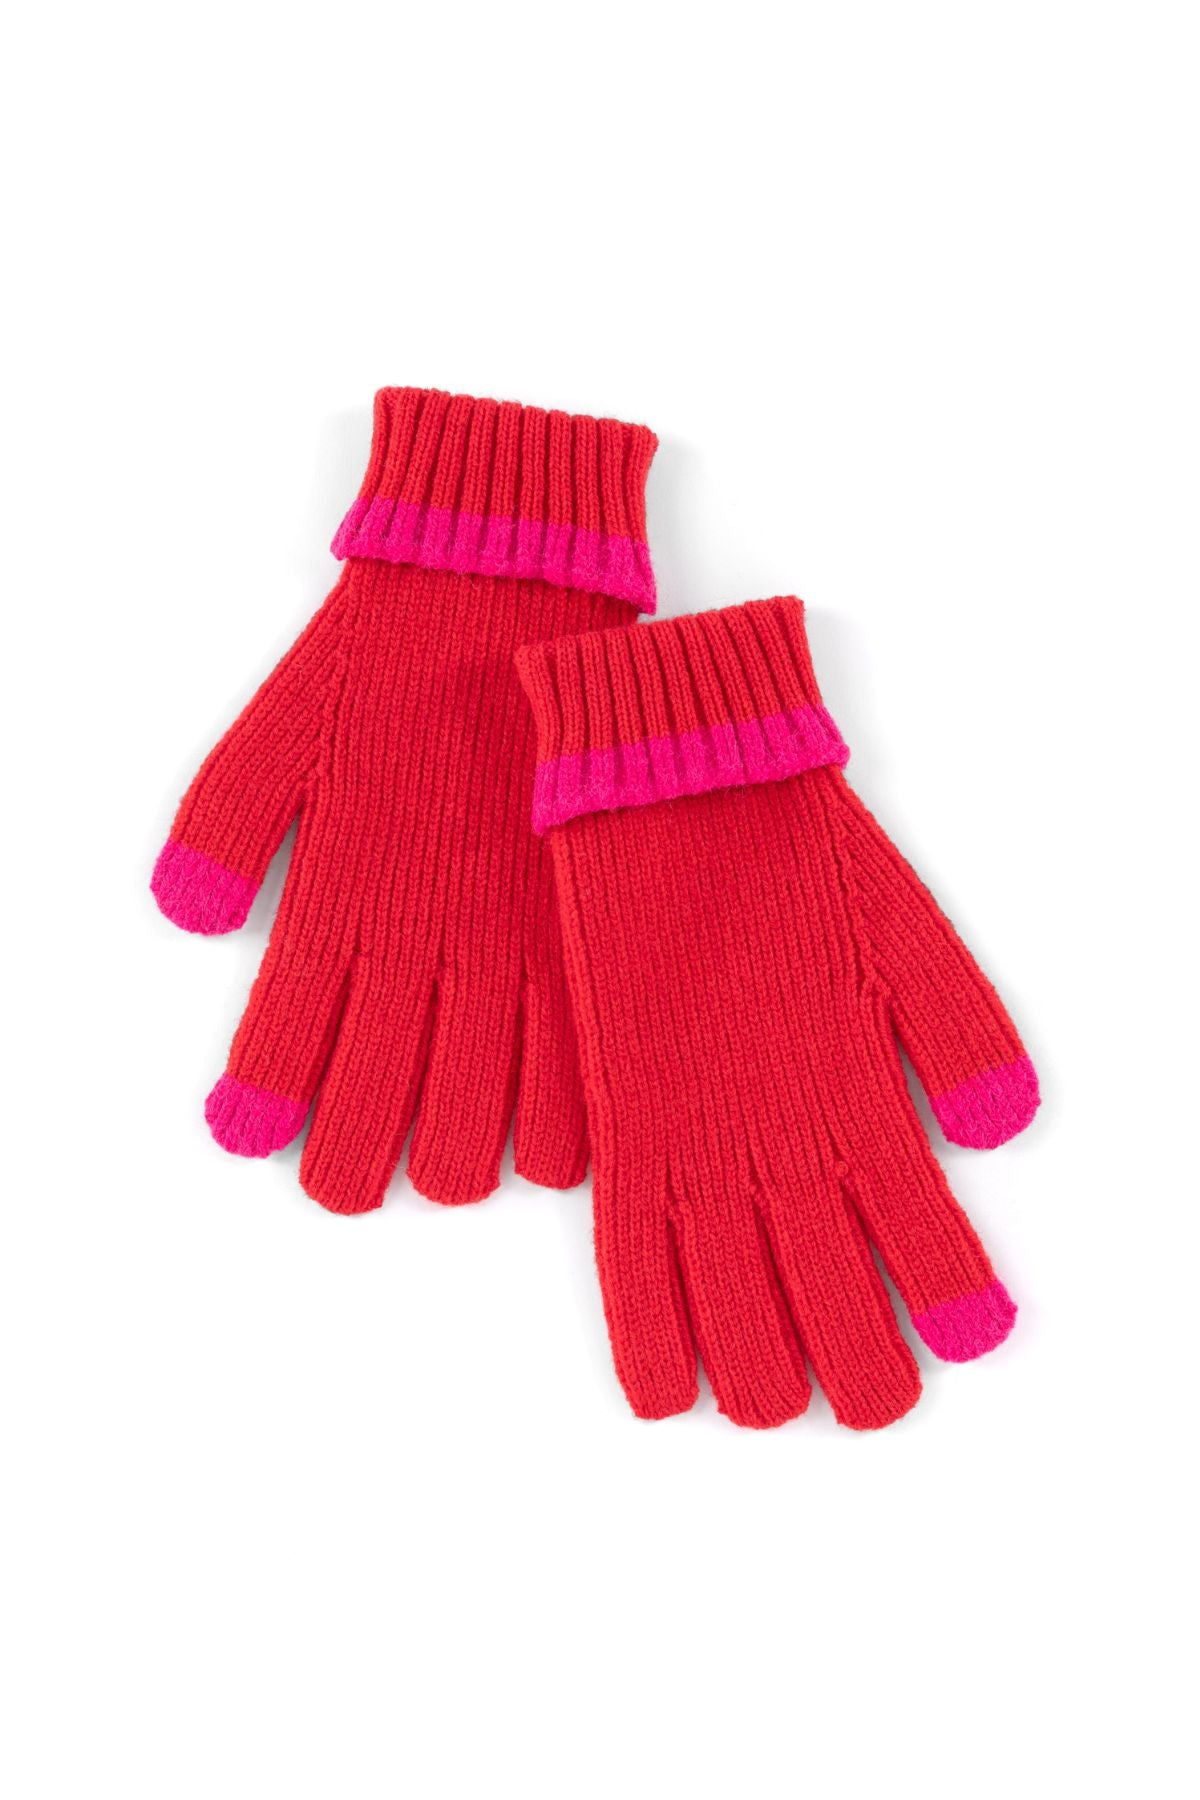 Red and pink glove